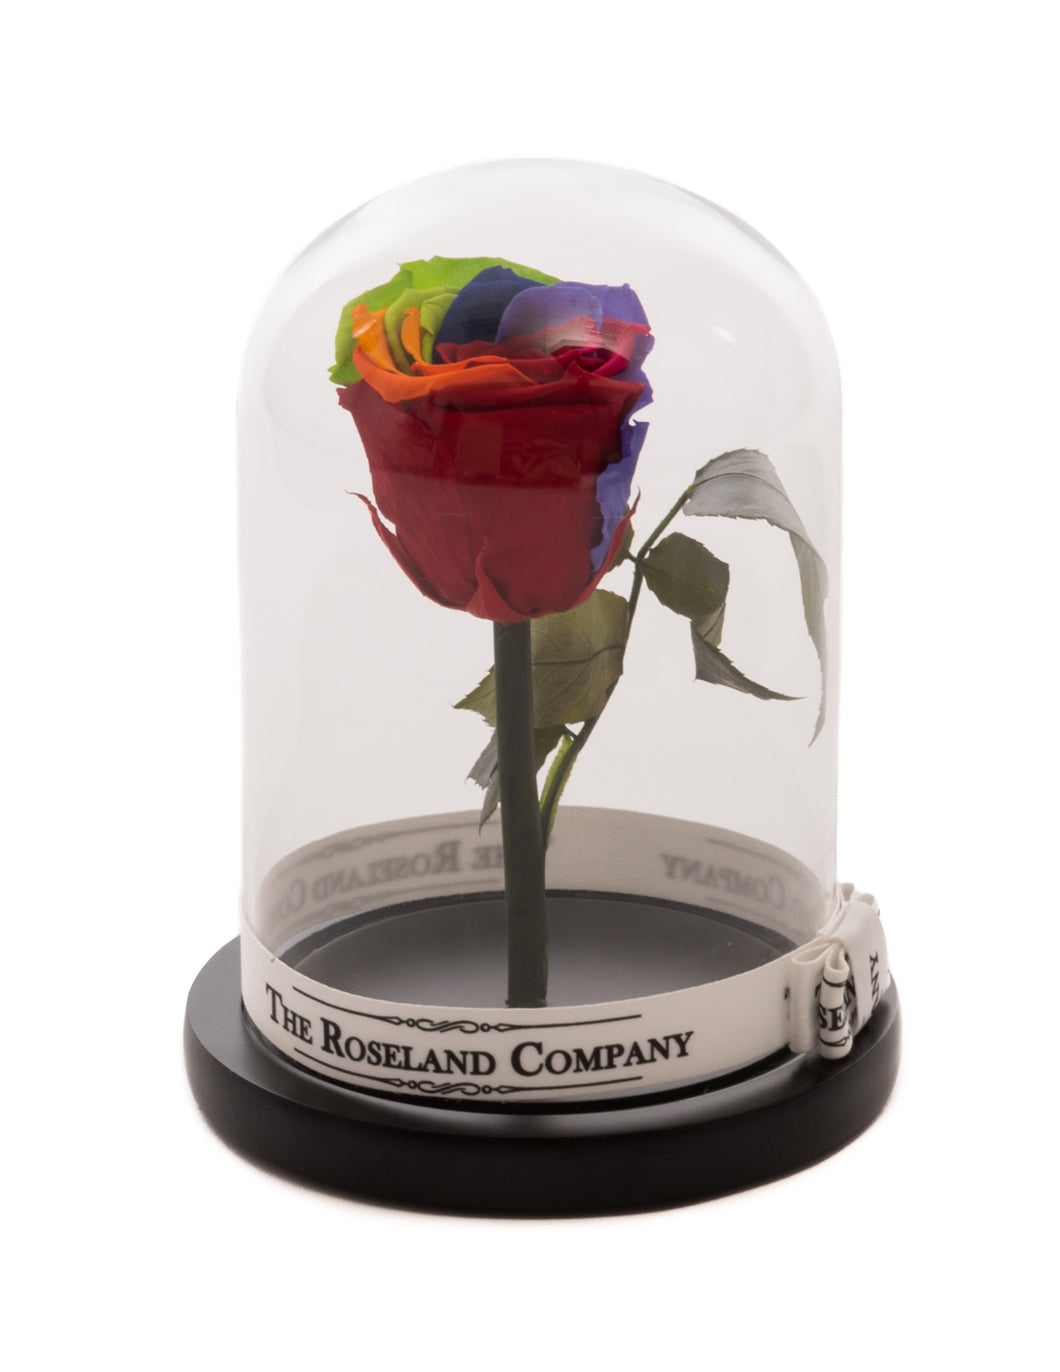 As seen in Beauty and the Beast: Rainbow Eternity Rose, Under the Dome